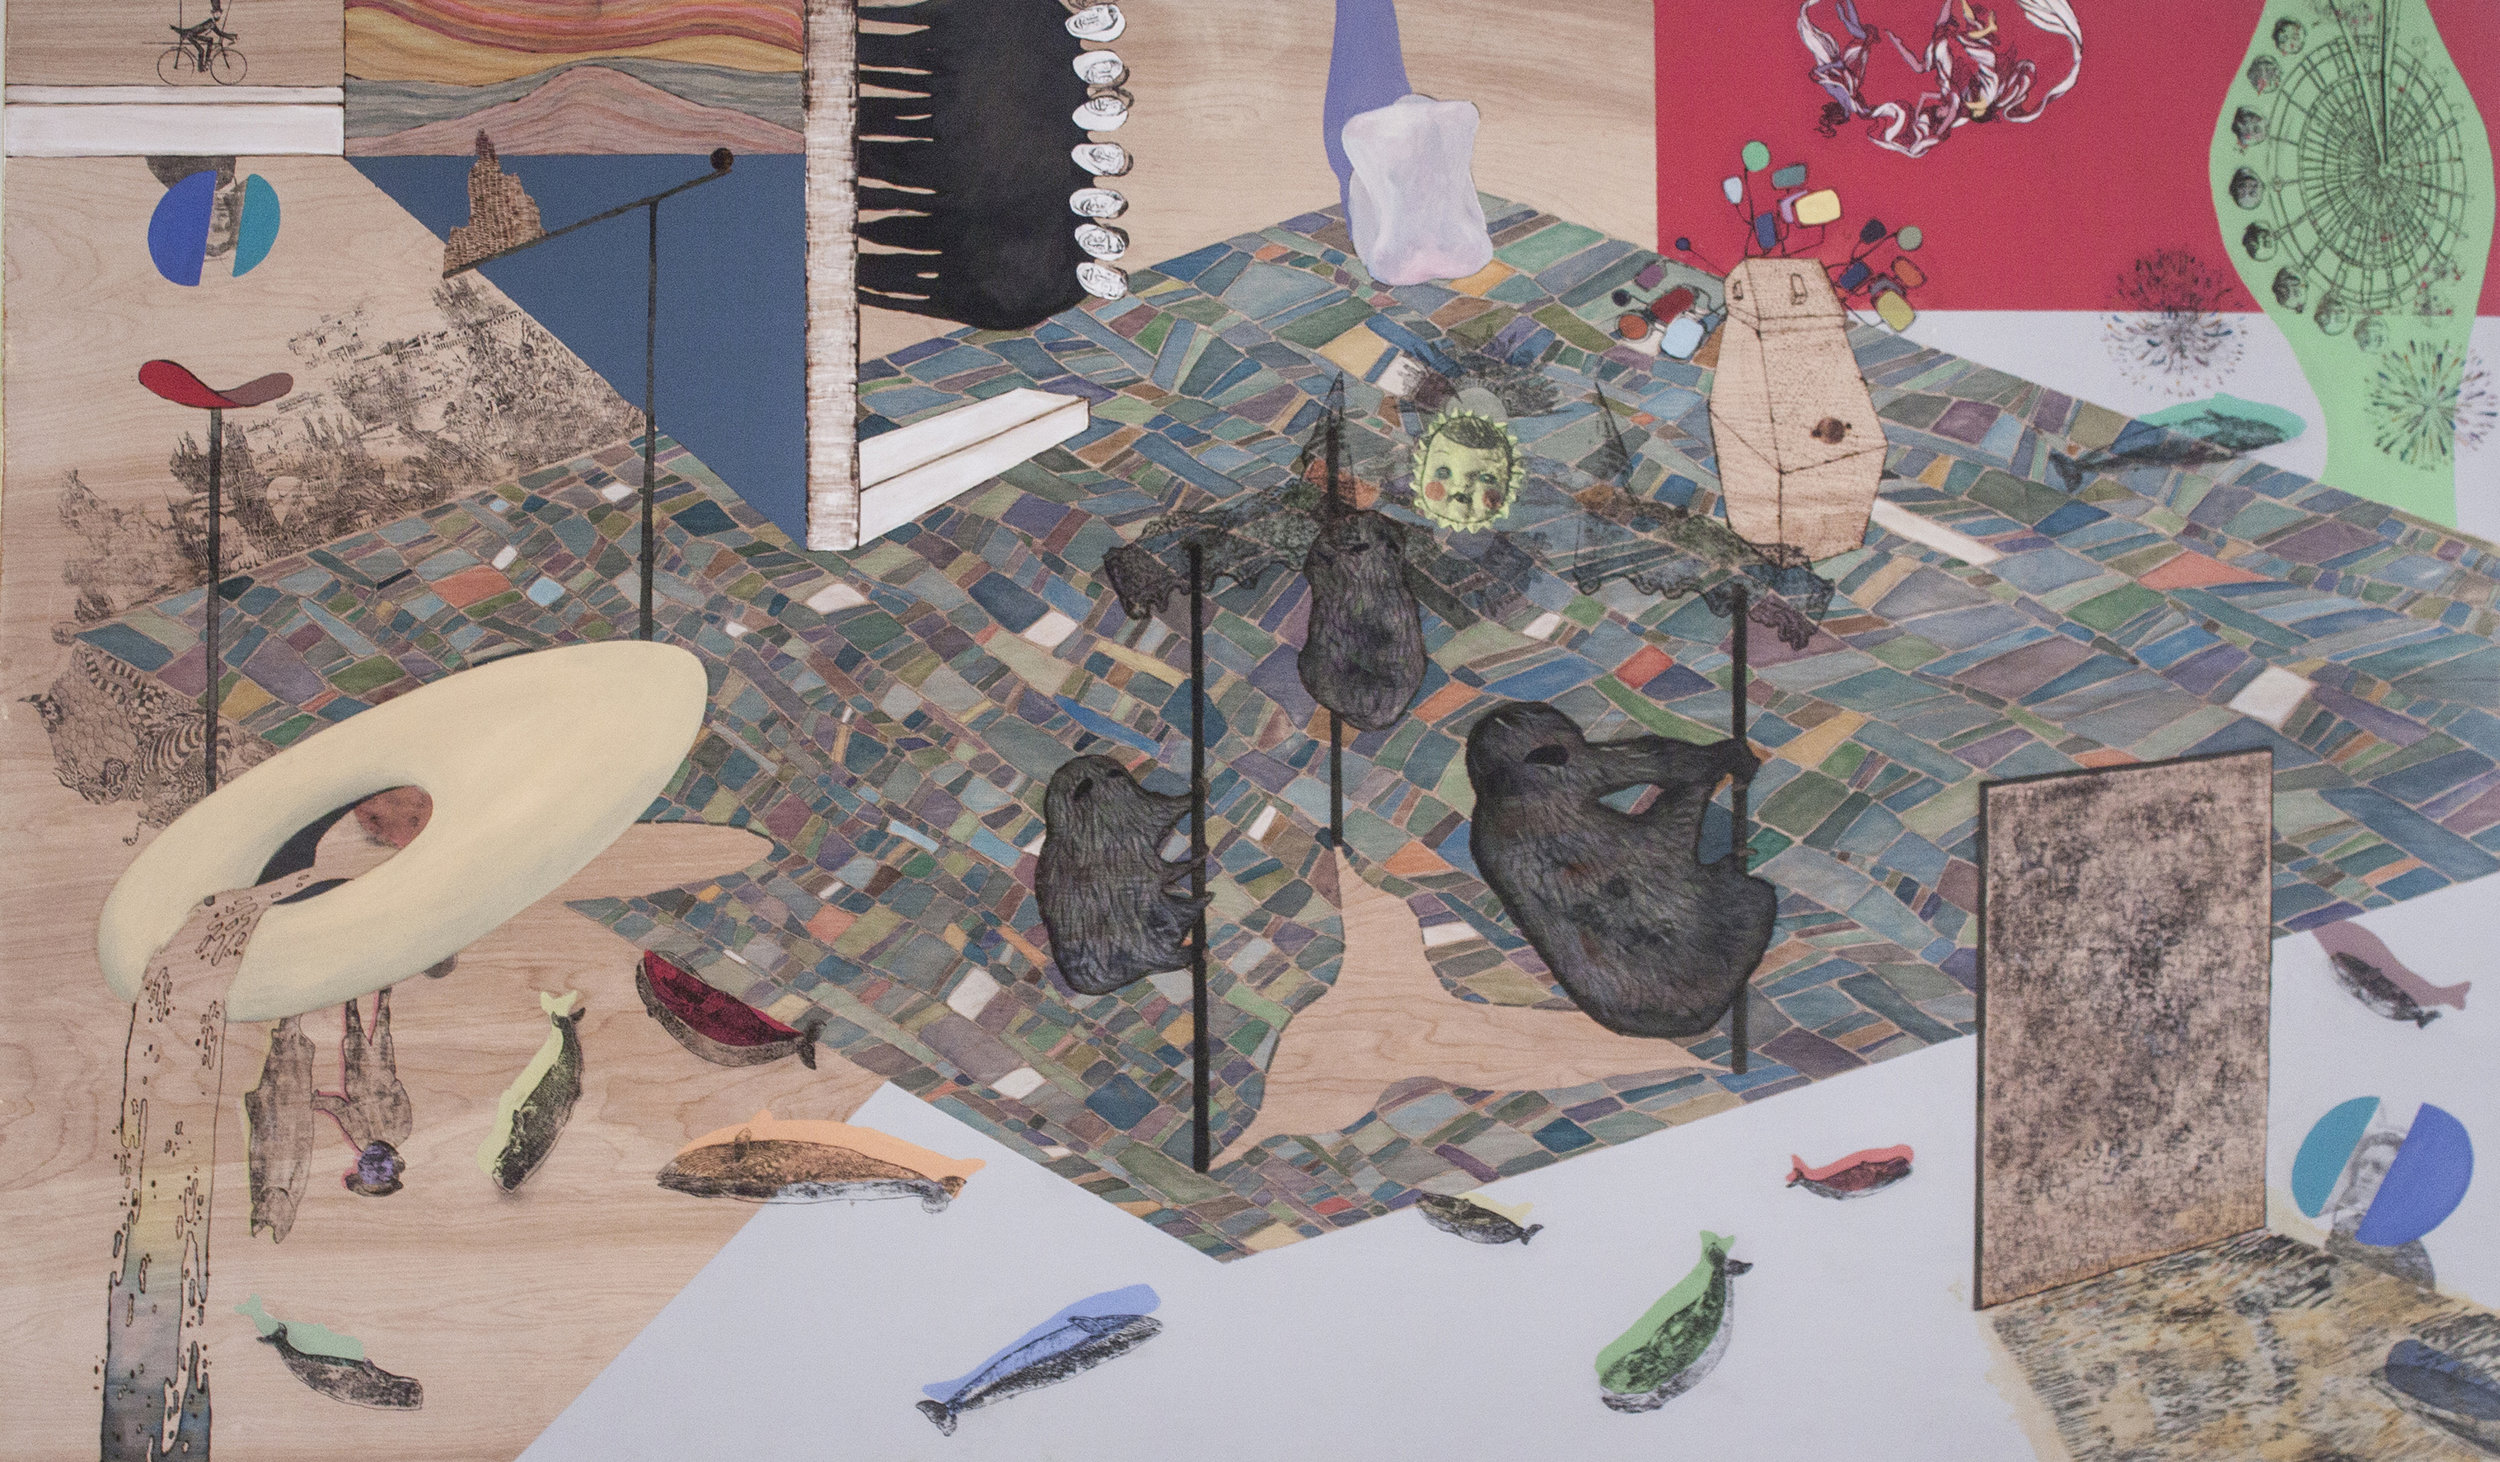 Privy Distortion, 36"x60", Watercolor and acrylic on wood panel, 2013